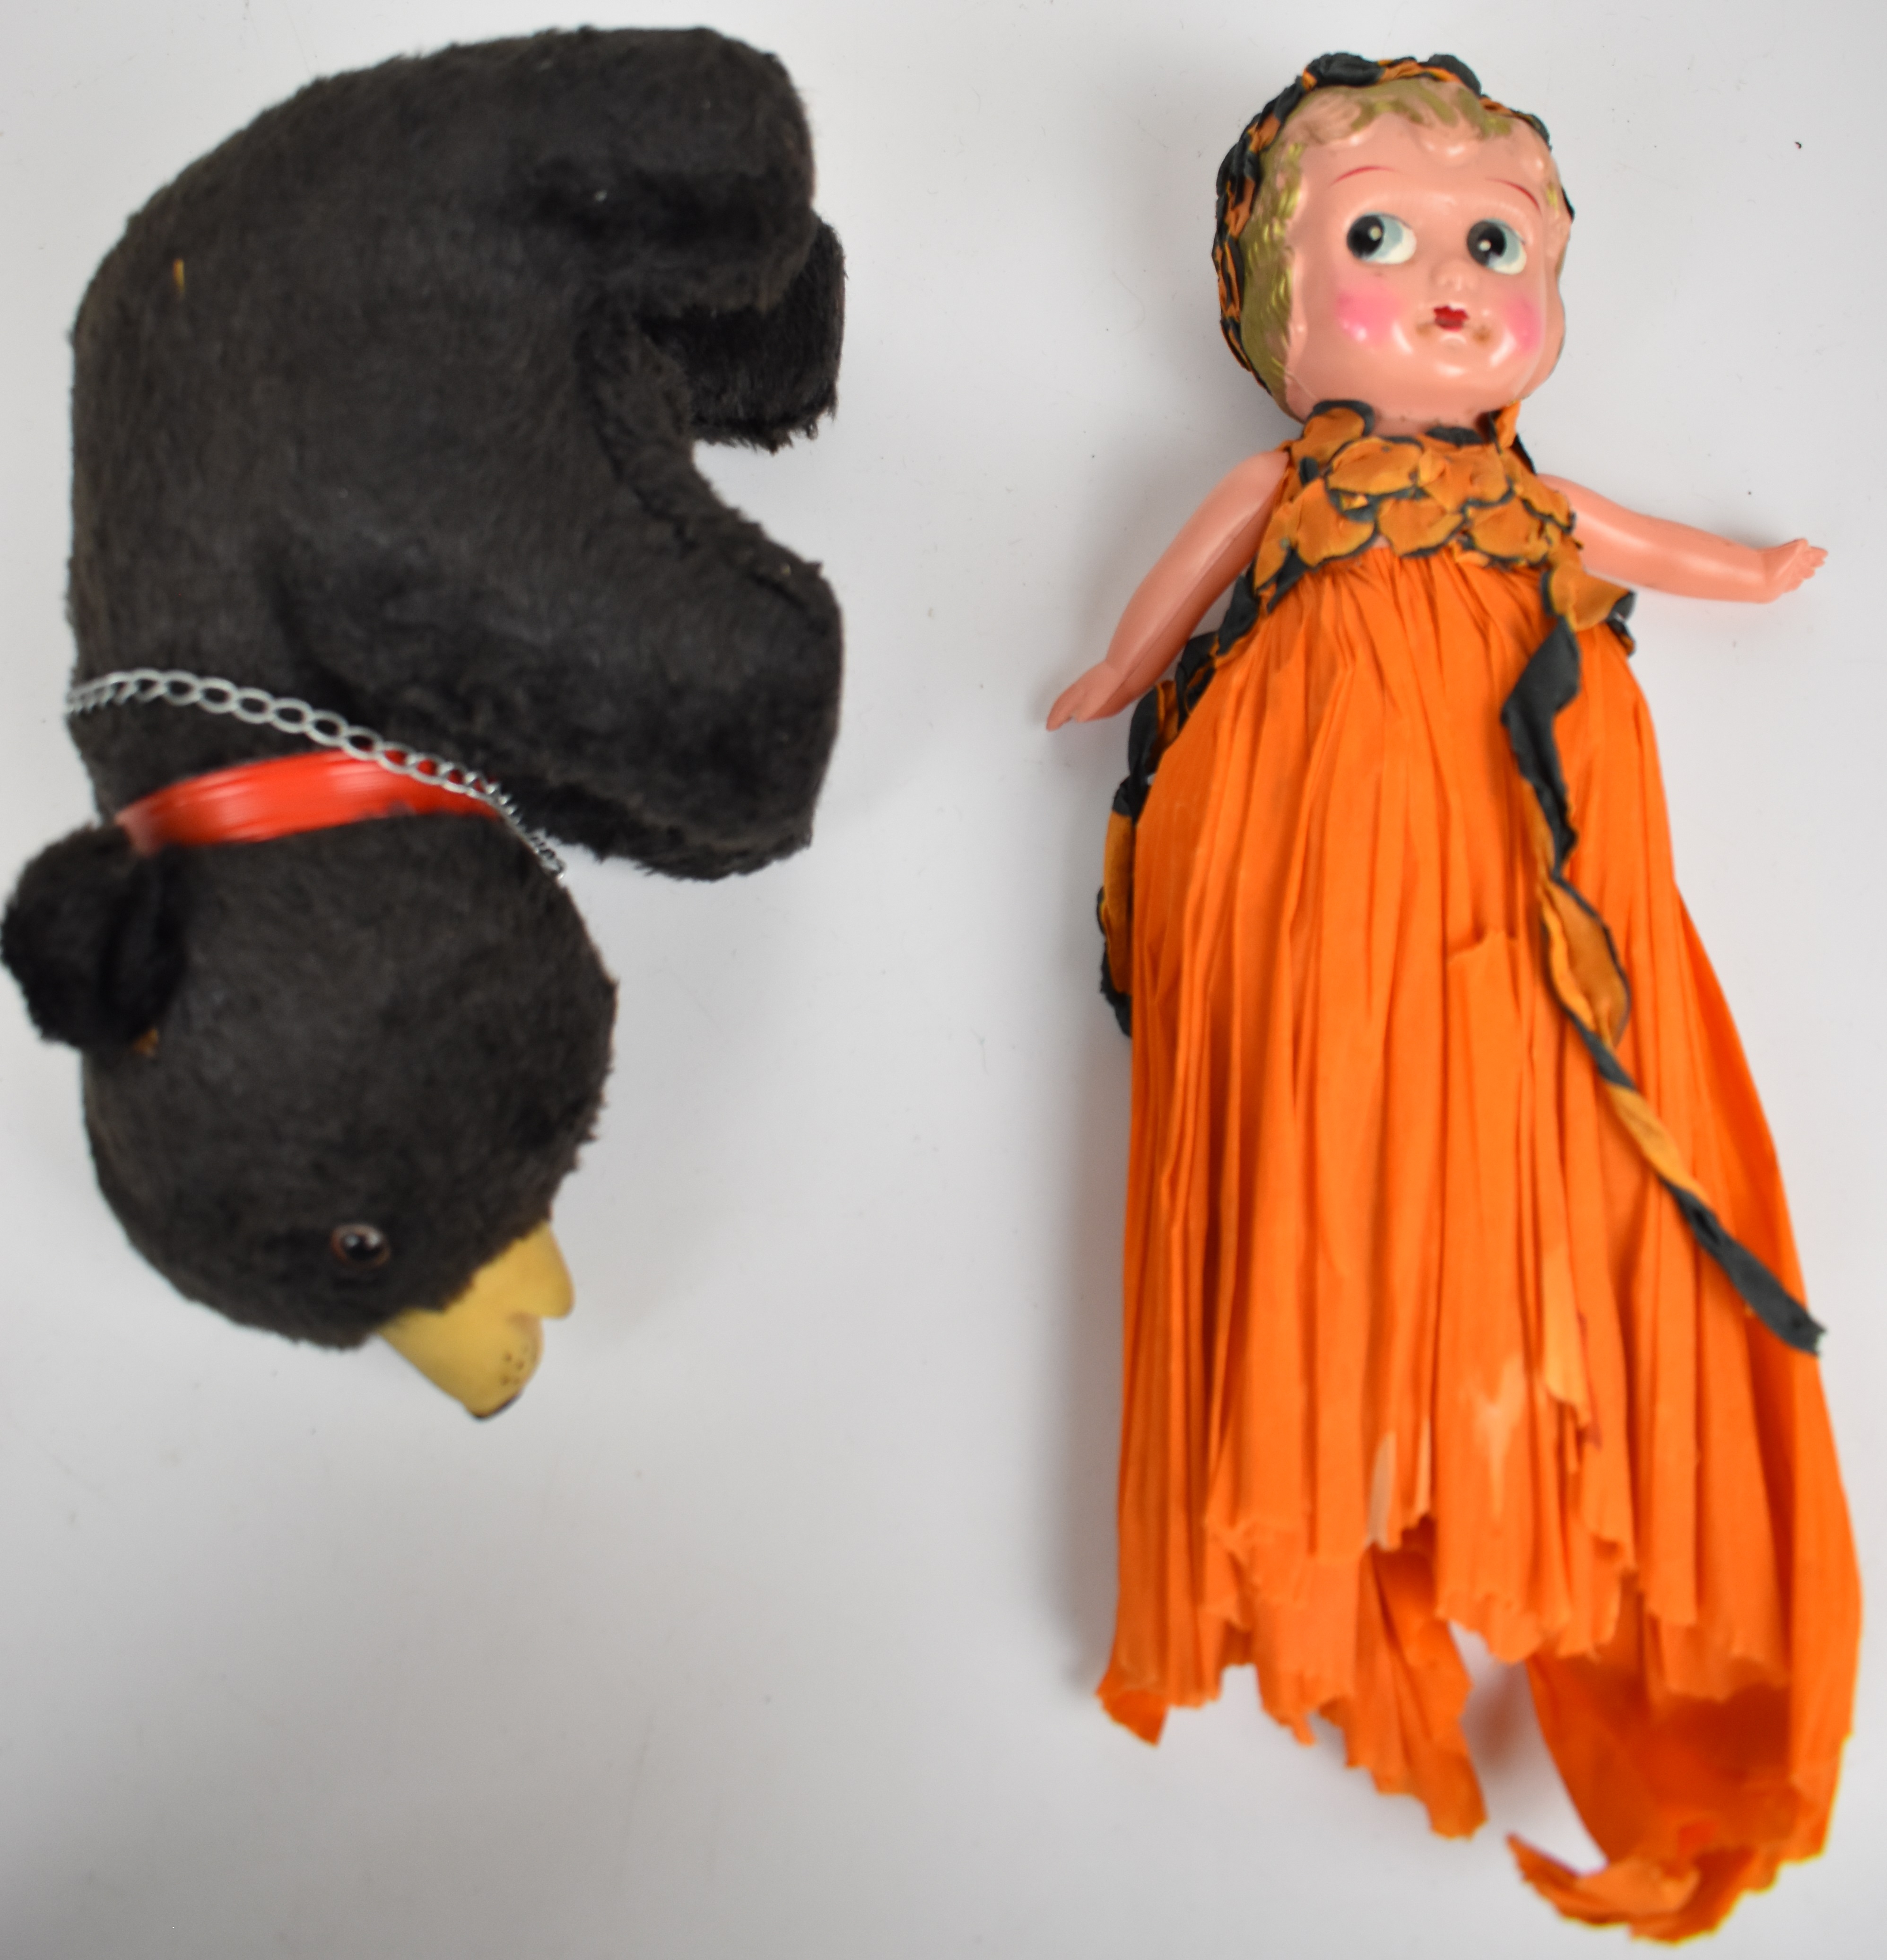 Five vintage Steiff, Merrythought and similar plush toys together with a 1930's celluloid doll in - Image 5 of 5